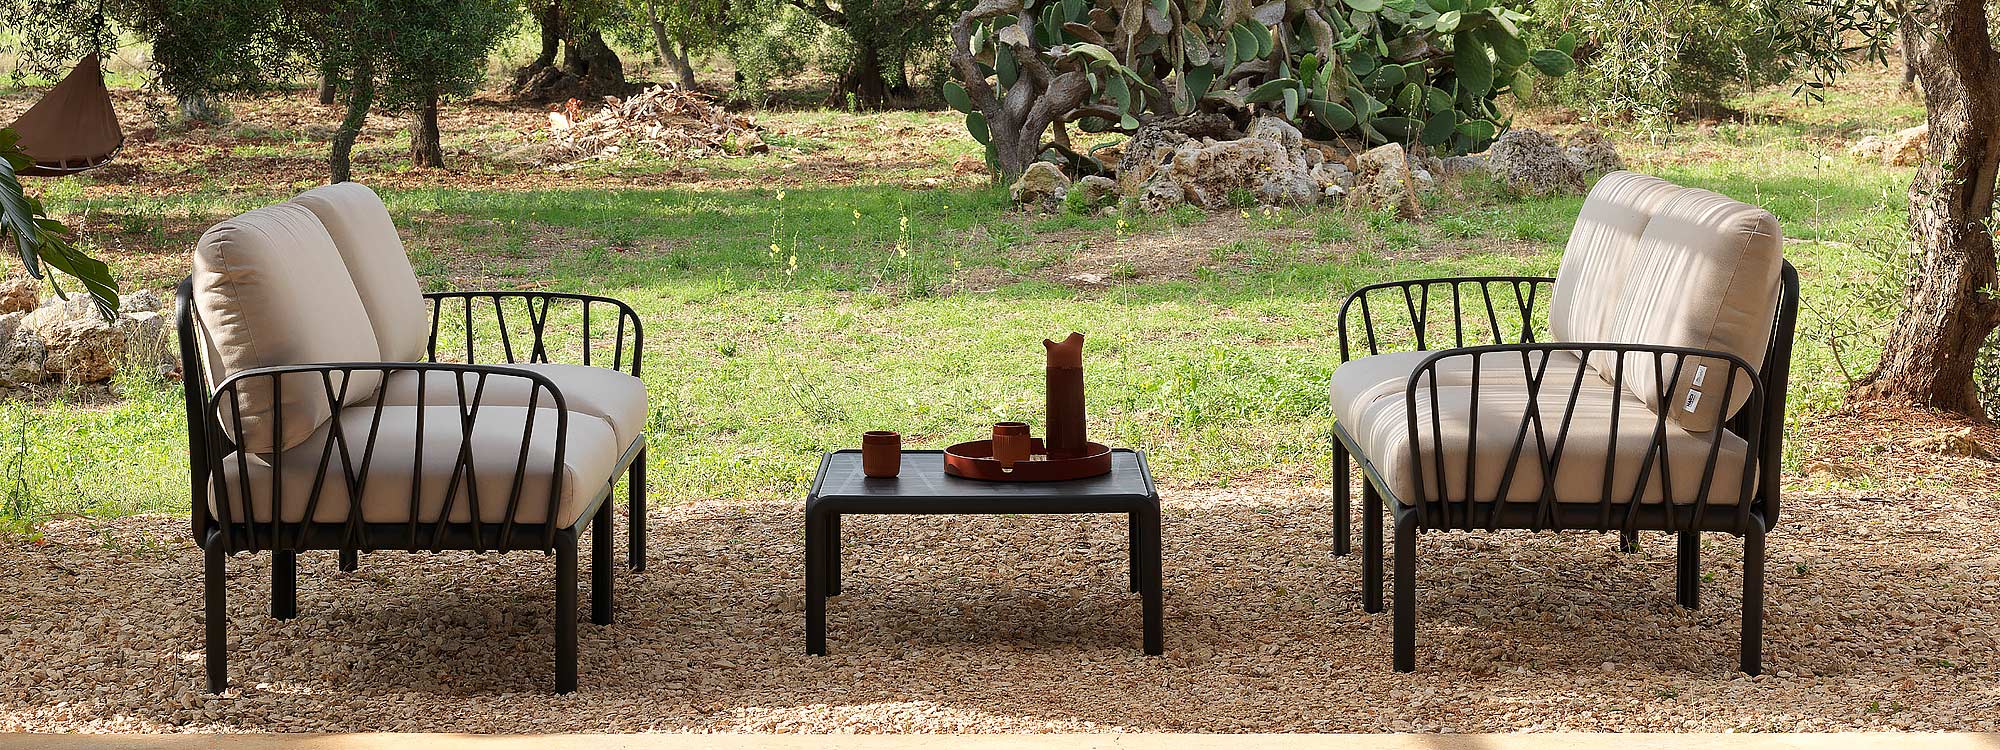 Image of pair of Komodo 2 seat black garden sofas with ecru cushions and low table, shown on wood chip floor with arid and rocky and in the background interspersed with cactuses